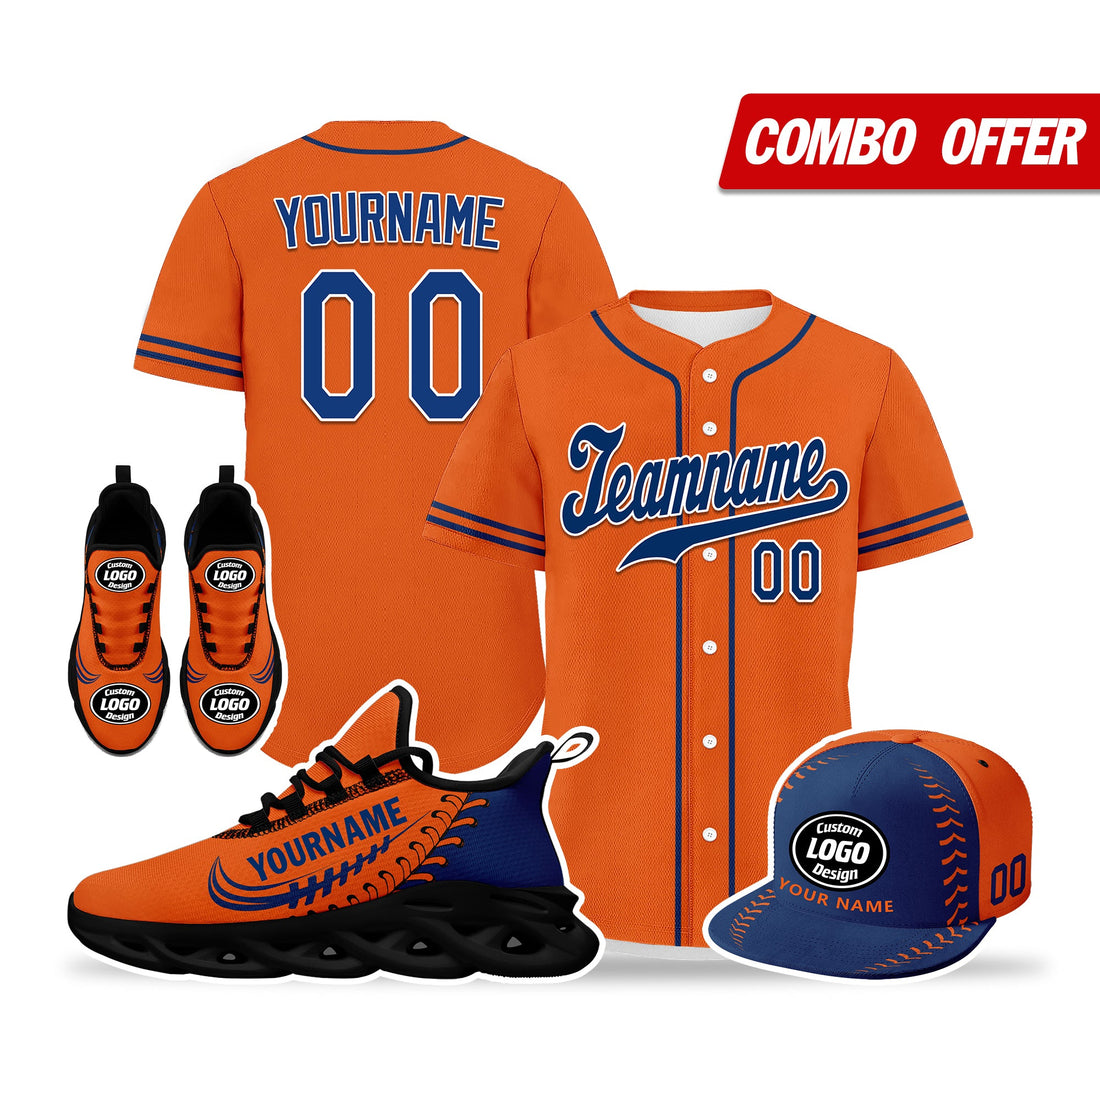 Custom Orange Jersey MaxSoul Shoes and Hat Combo Offer Personalized ZH-bd0b00e0-a